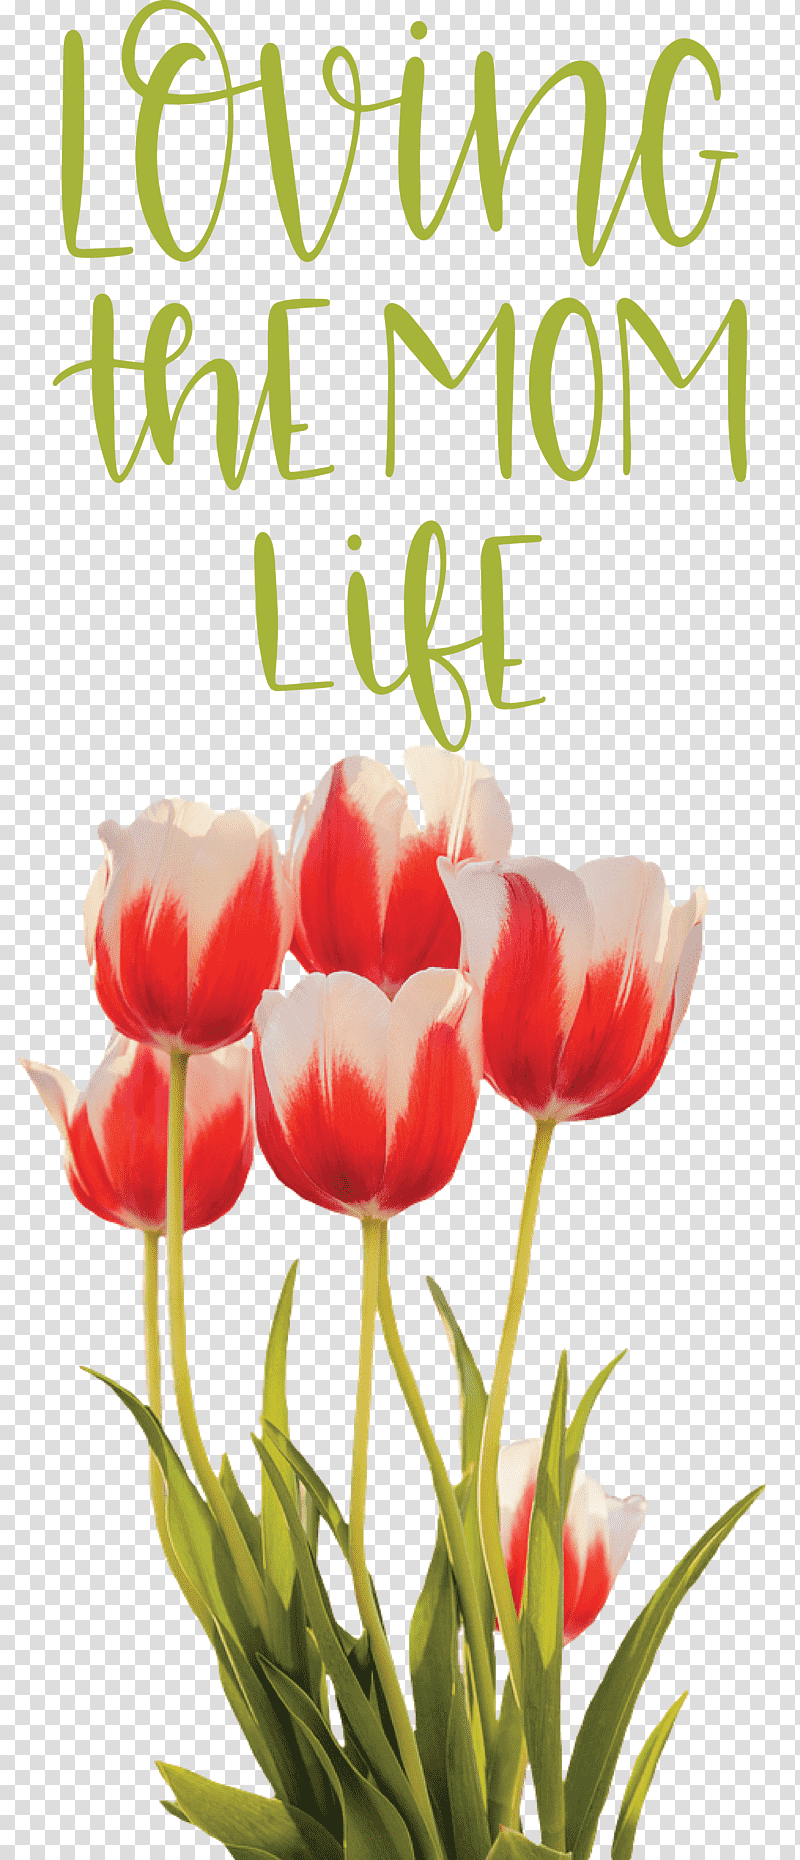 Mothers Day Mothers Day Quote Loving The Mom Life, Tulip, Flower, Flower Garden, Rose, Floral Design, Spring transparent background PNG clipart